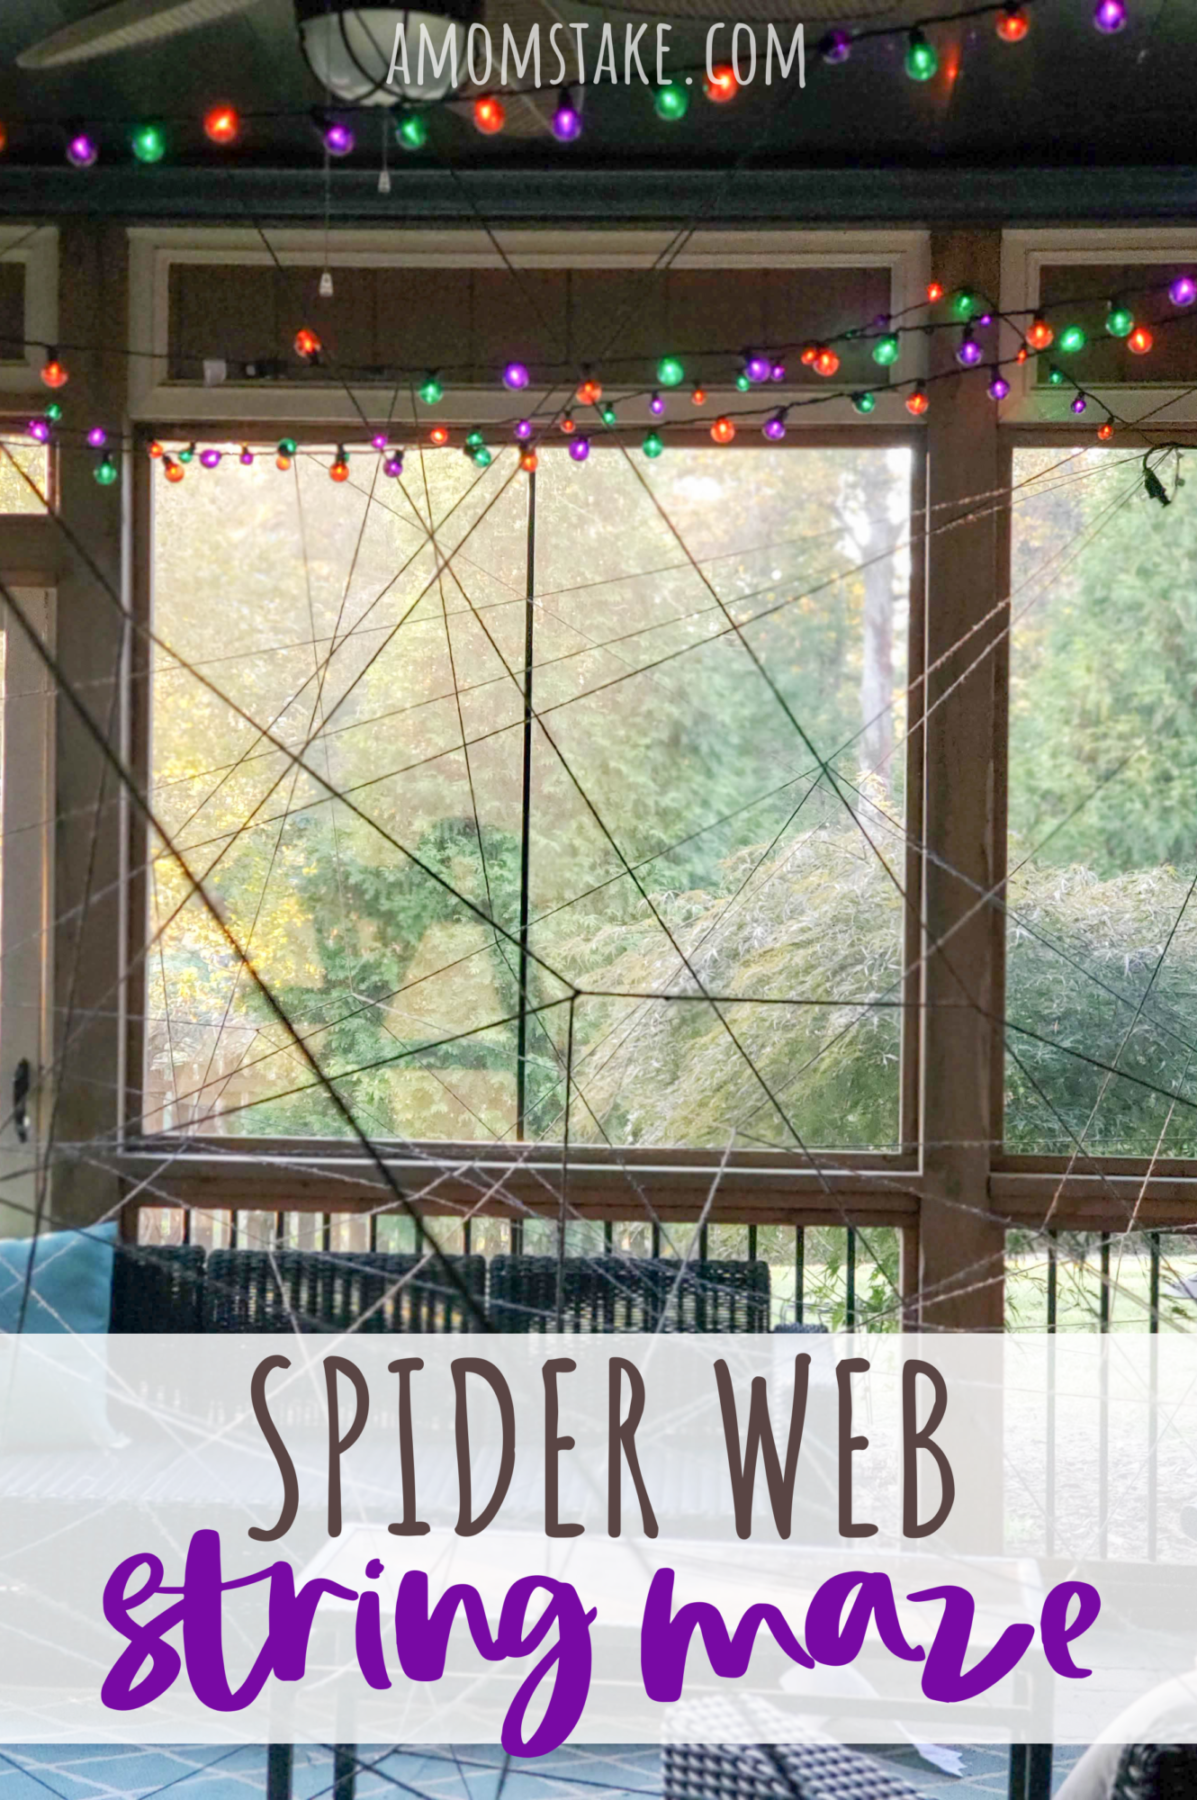 Spider web maze Halloween activity for kids! See all 21 Halloween Party Game Ideas and party checklist printable. Get inspired by all these fun kid-friendly Halloween Activities and games for a variety of ages. Fun themed Halloween games for the whole family.